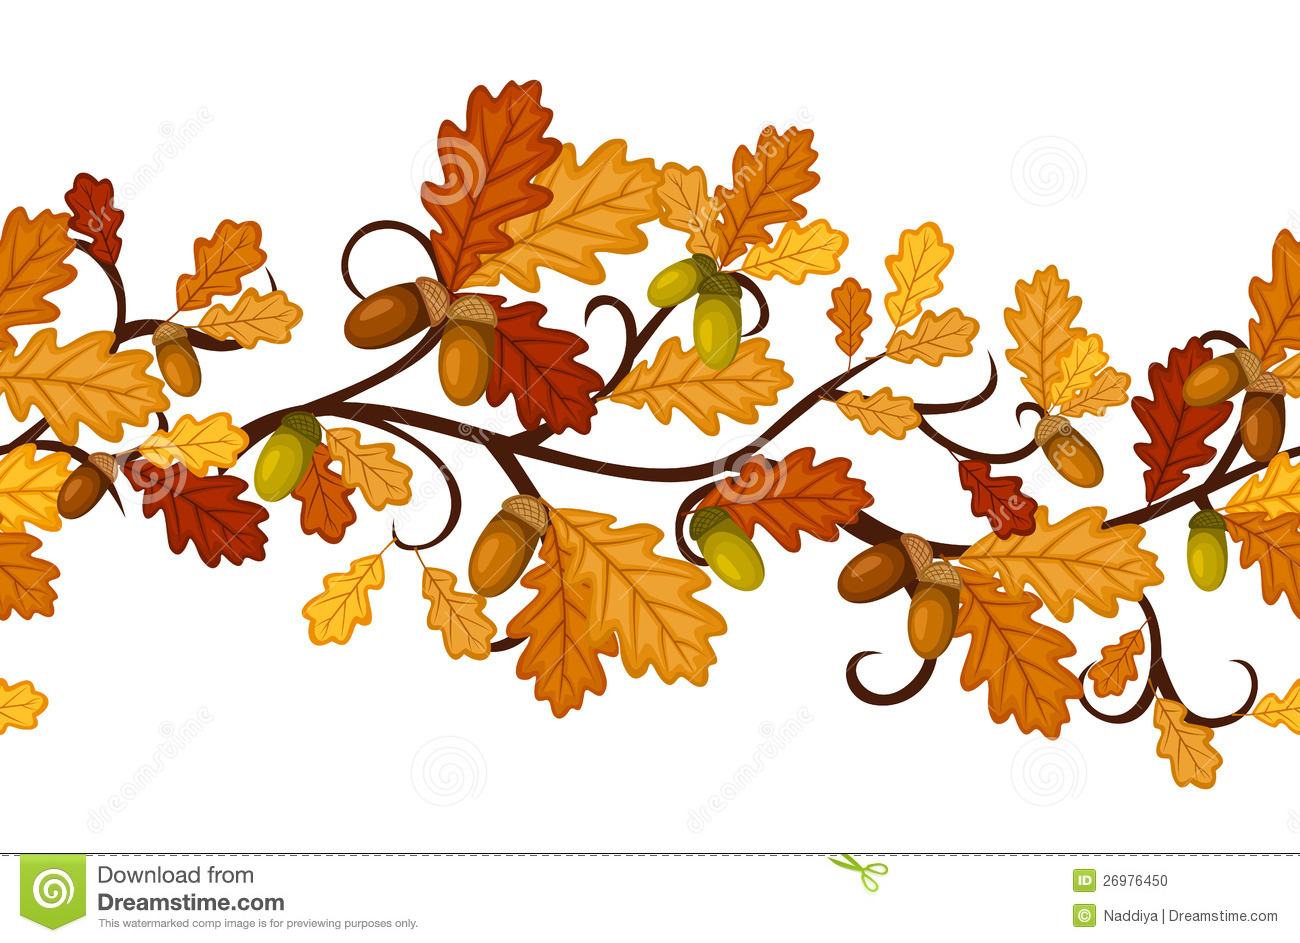 Seamless Pattern With Autumn Oak Leaves Stock Photo   Image  26976450